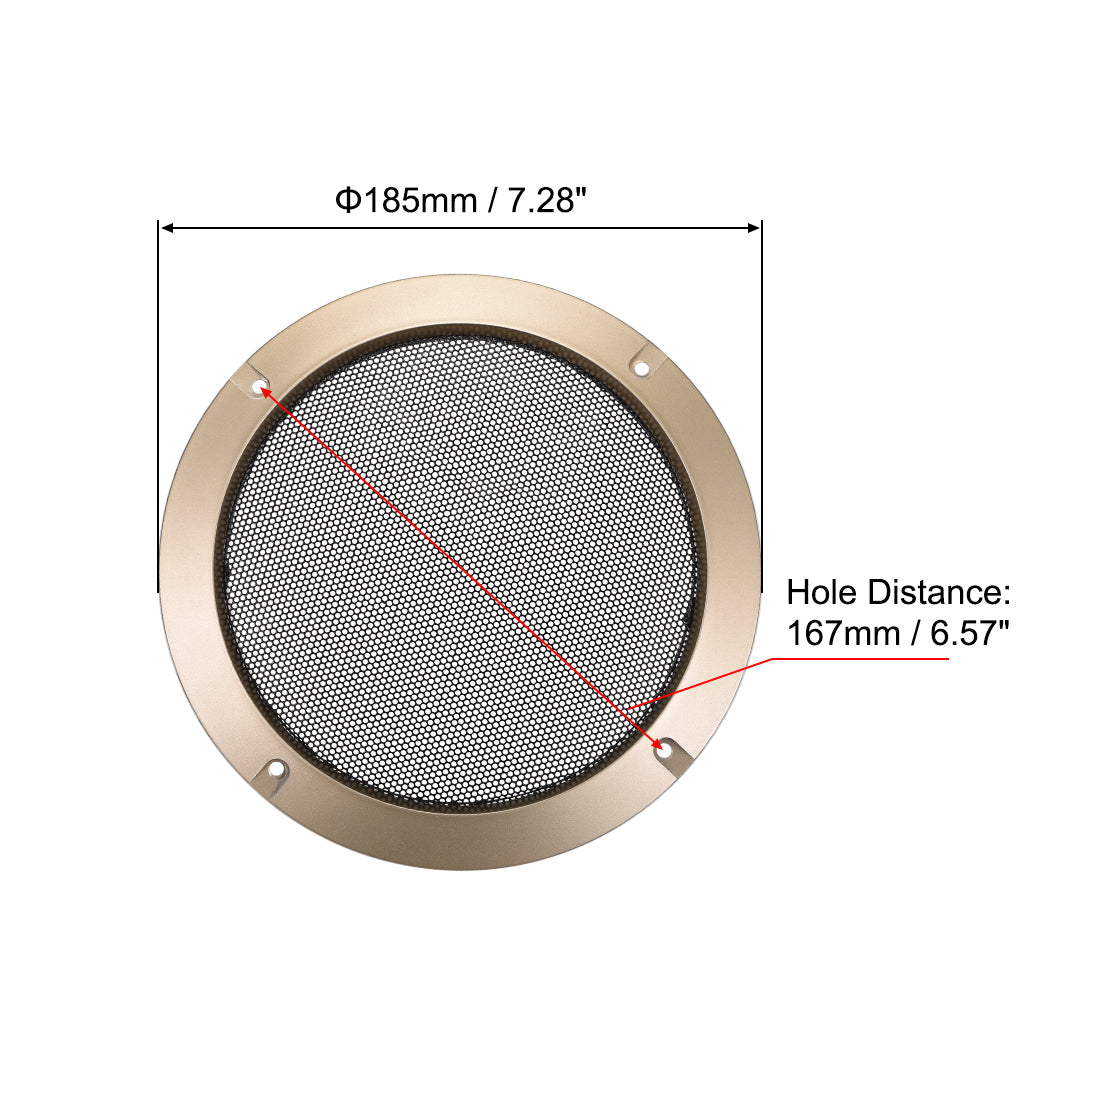 uxcell Uxcell 2pcs 6.5" Speaker Grill Mesh Decorative Circle Subwoofer Guard Protector Cover for 6.5"  Mounting Hole Diagonal Distance